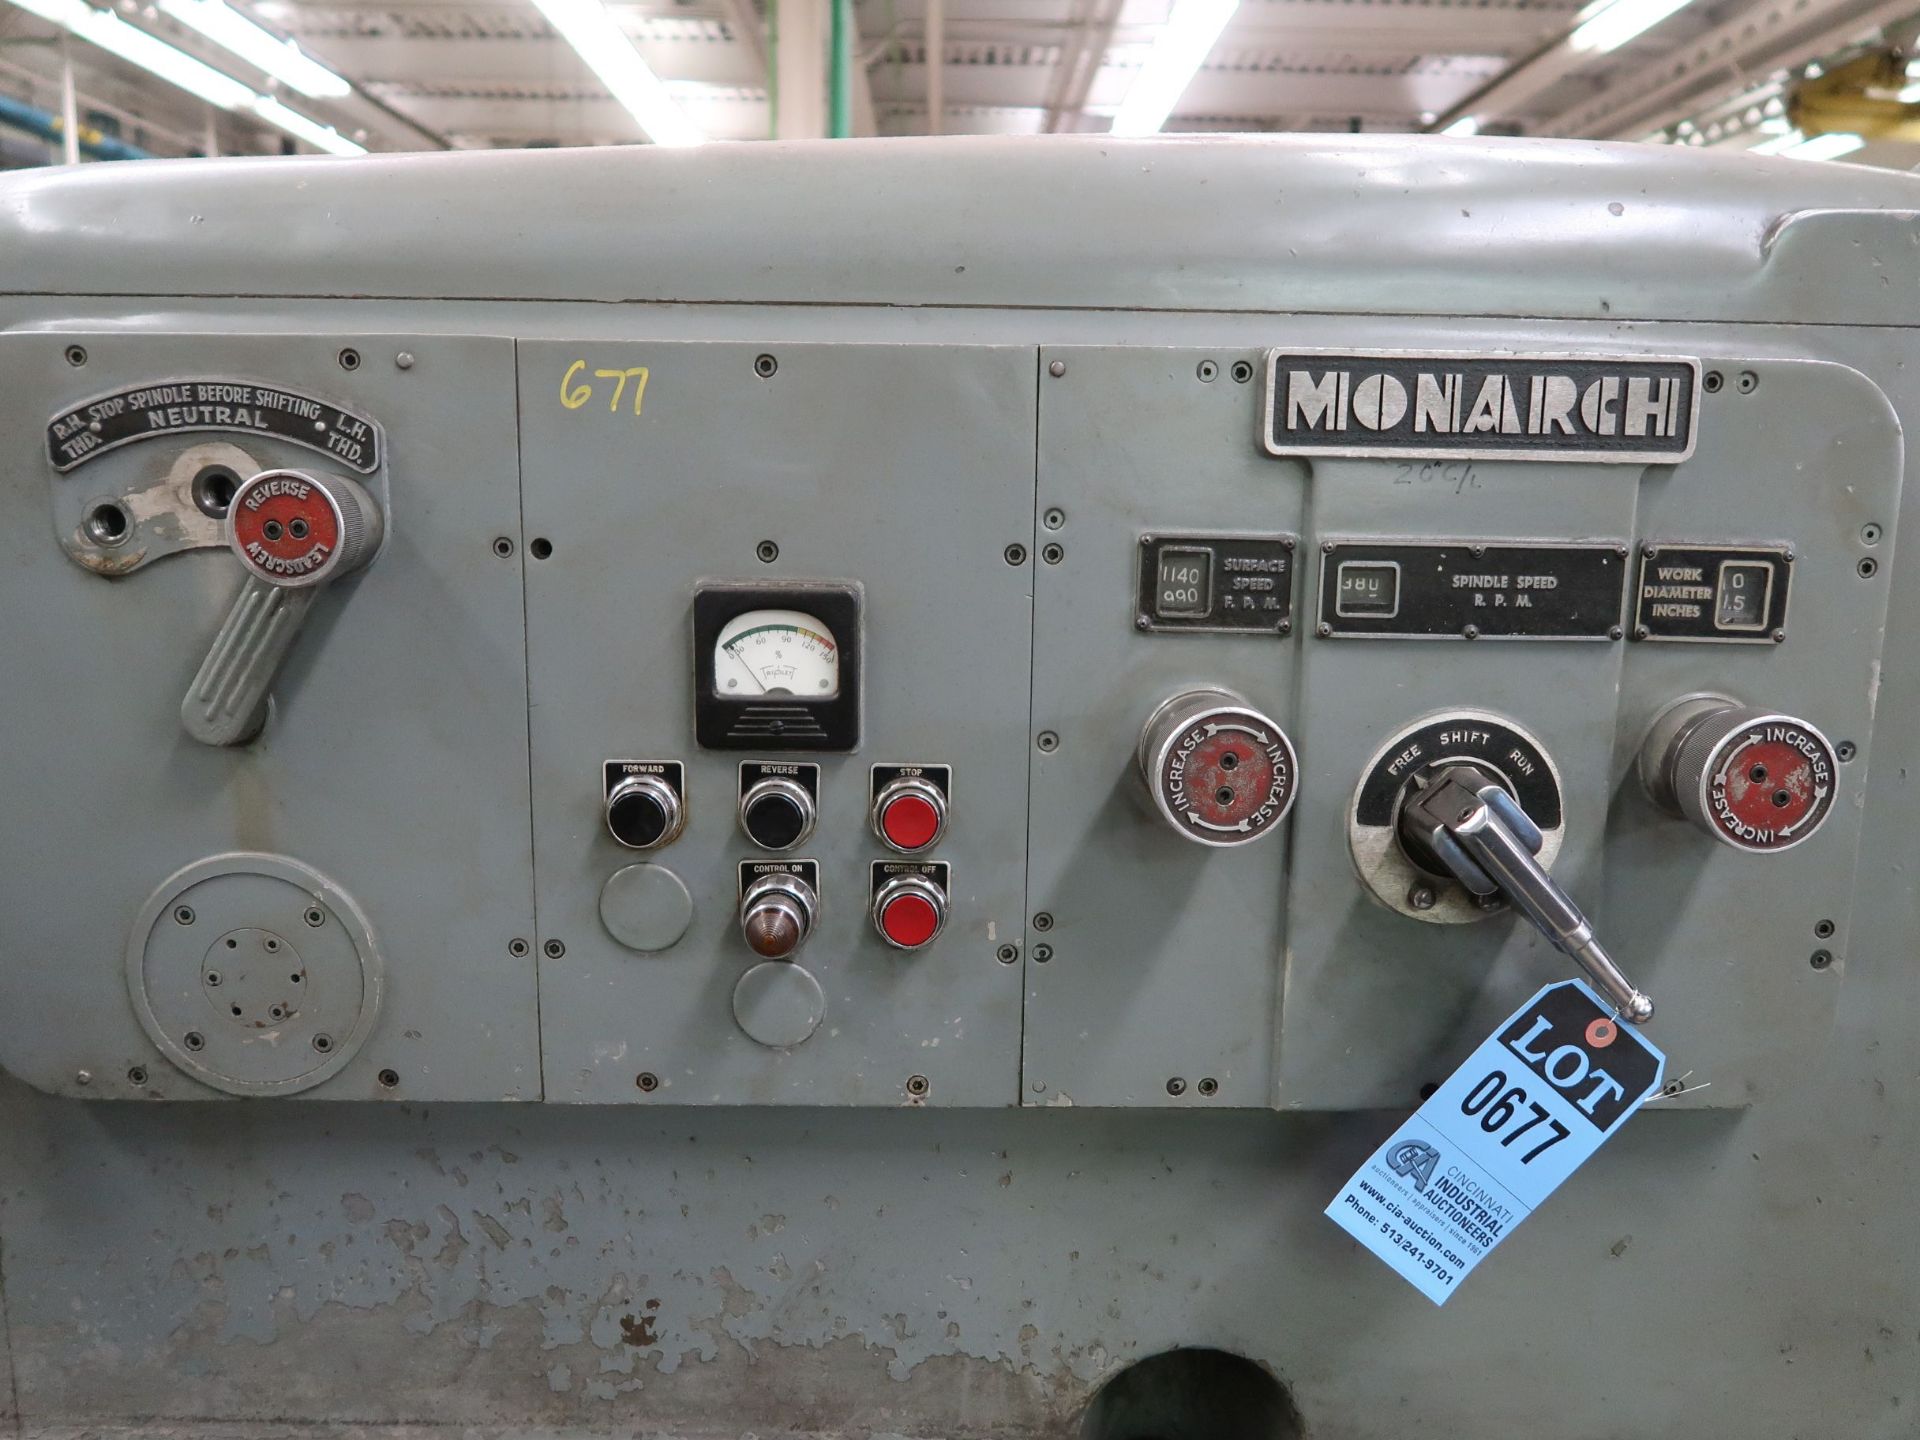 28" X 192" MONARCH MODEL 3220-28X192 GEARD HEAD ENGINE LATHE; S/N 49825, SPINDLE SPEED 31 - 1,140 - Image 5 of 17